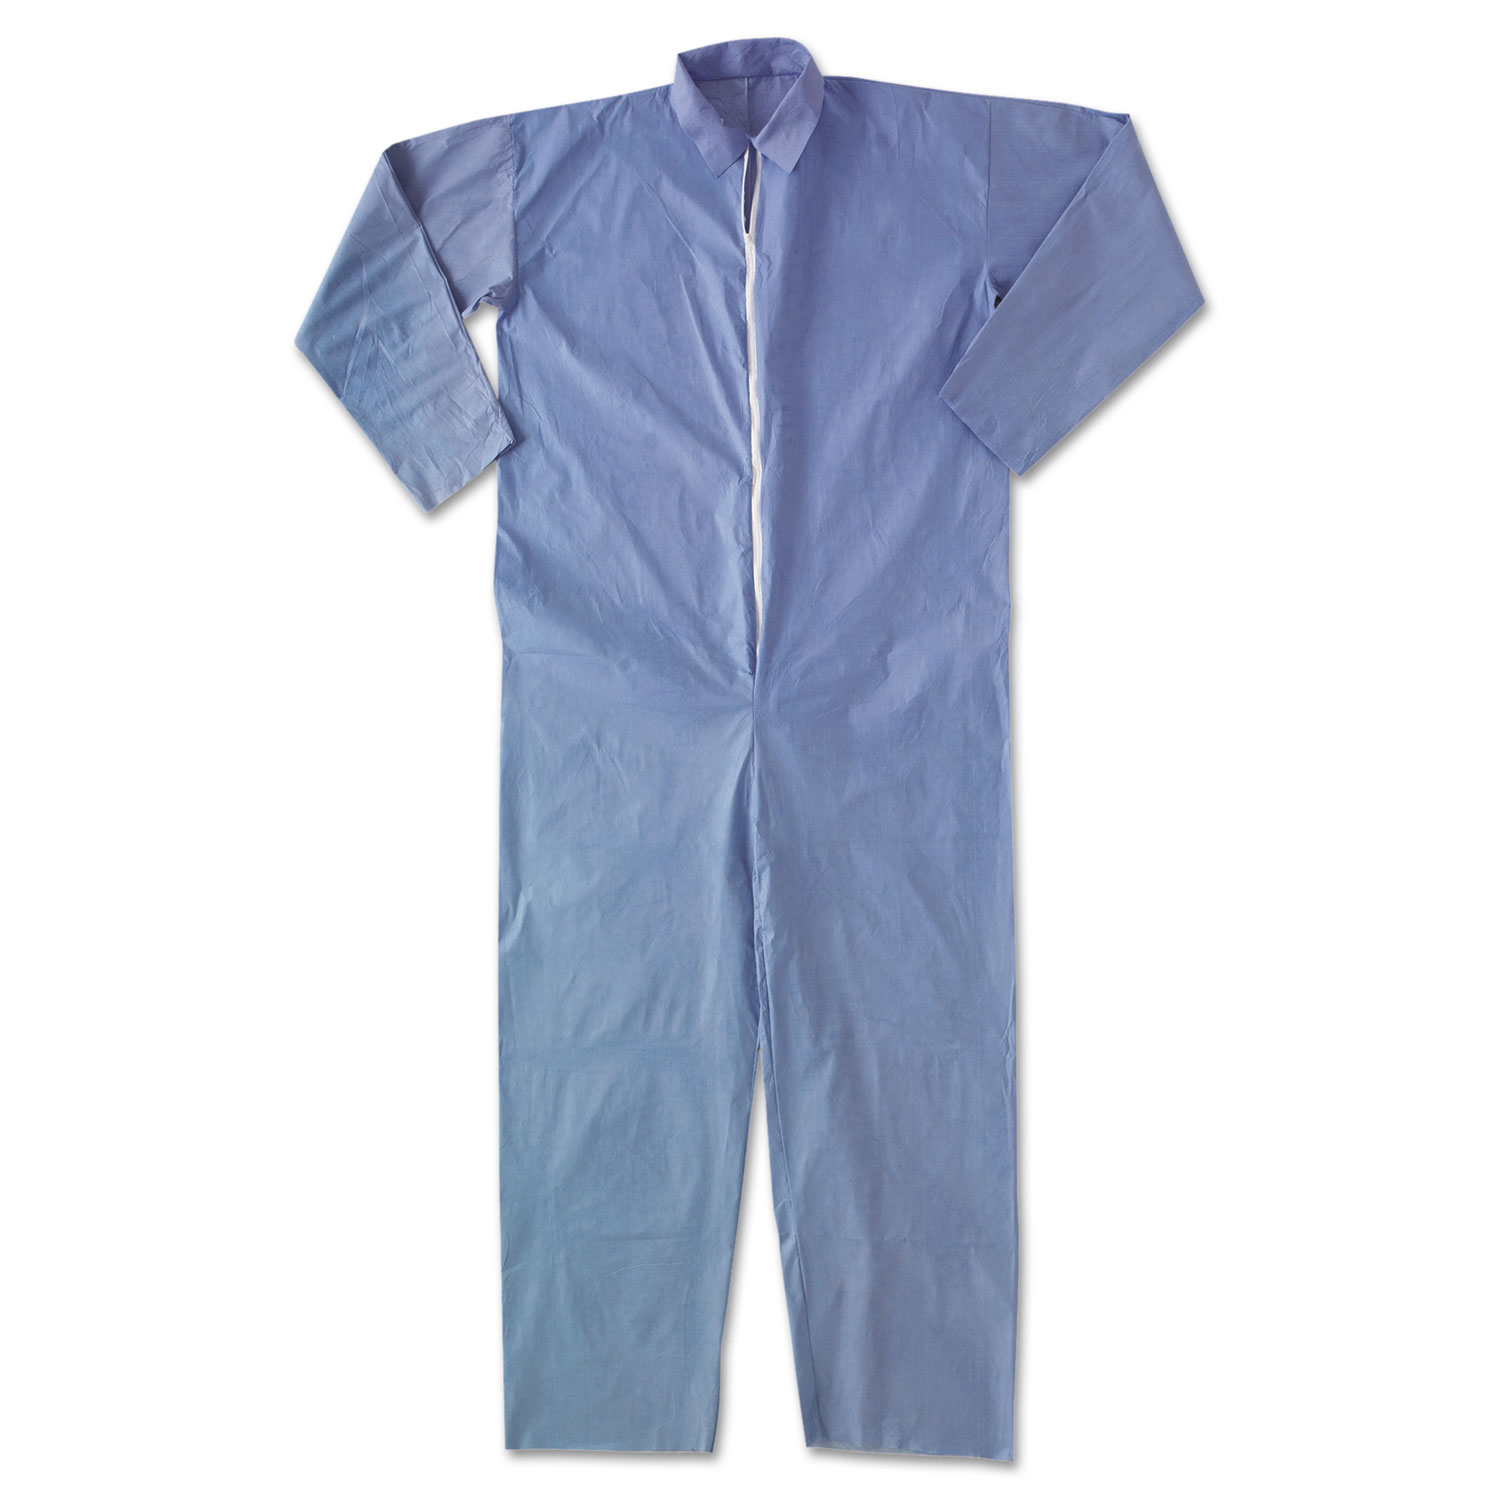 A65 Flame Resistant Coveralls, 3X-Large, Blue